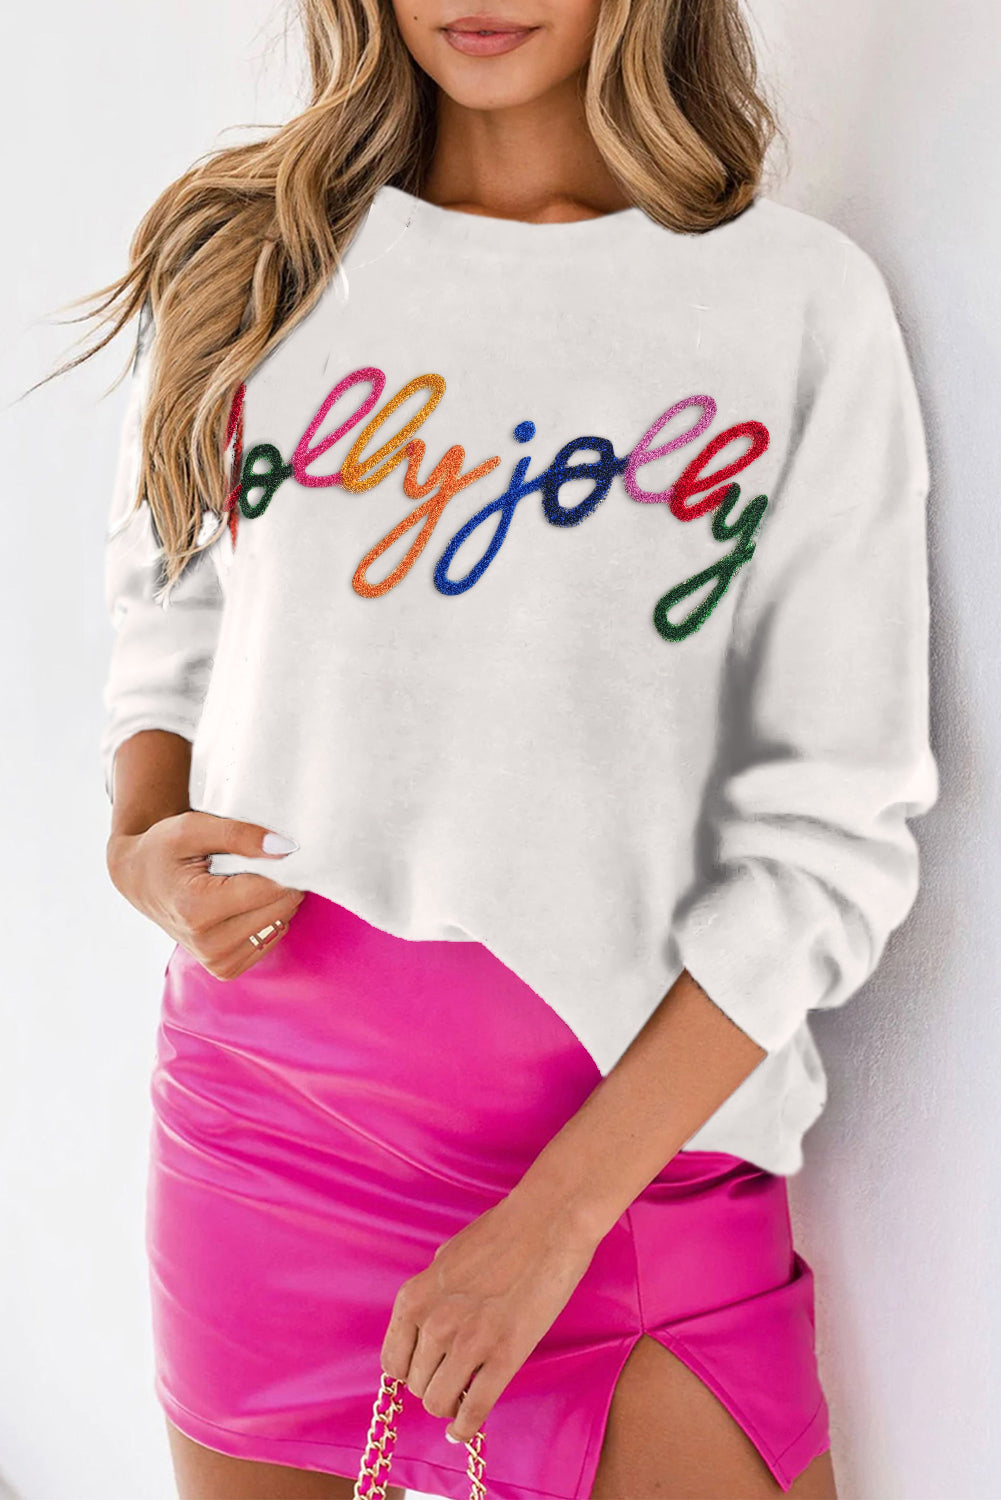 White Holly Jolly Round Neck Casual Sweater